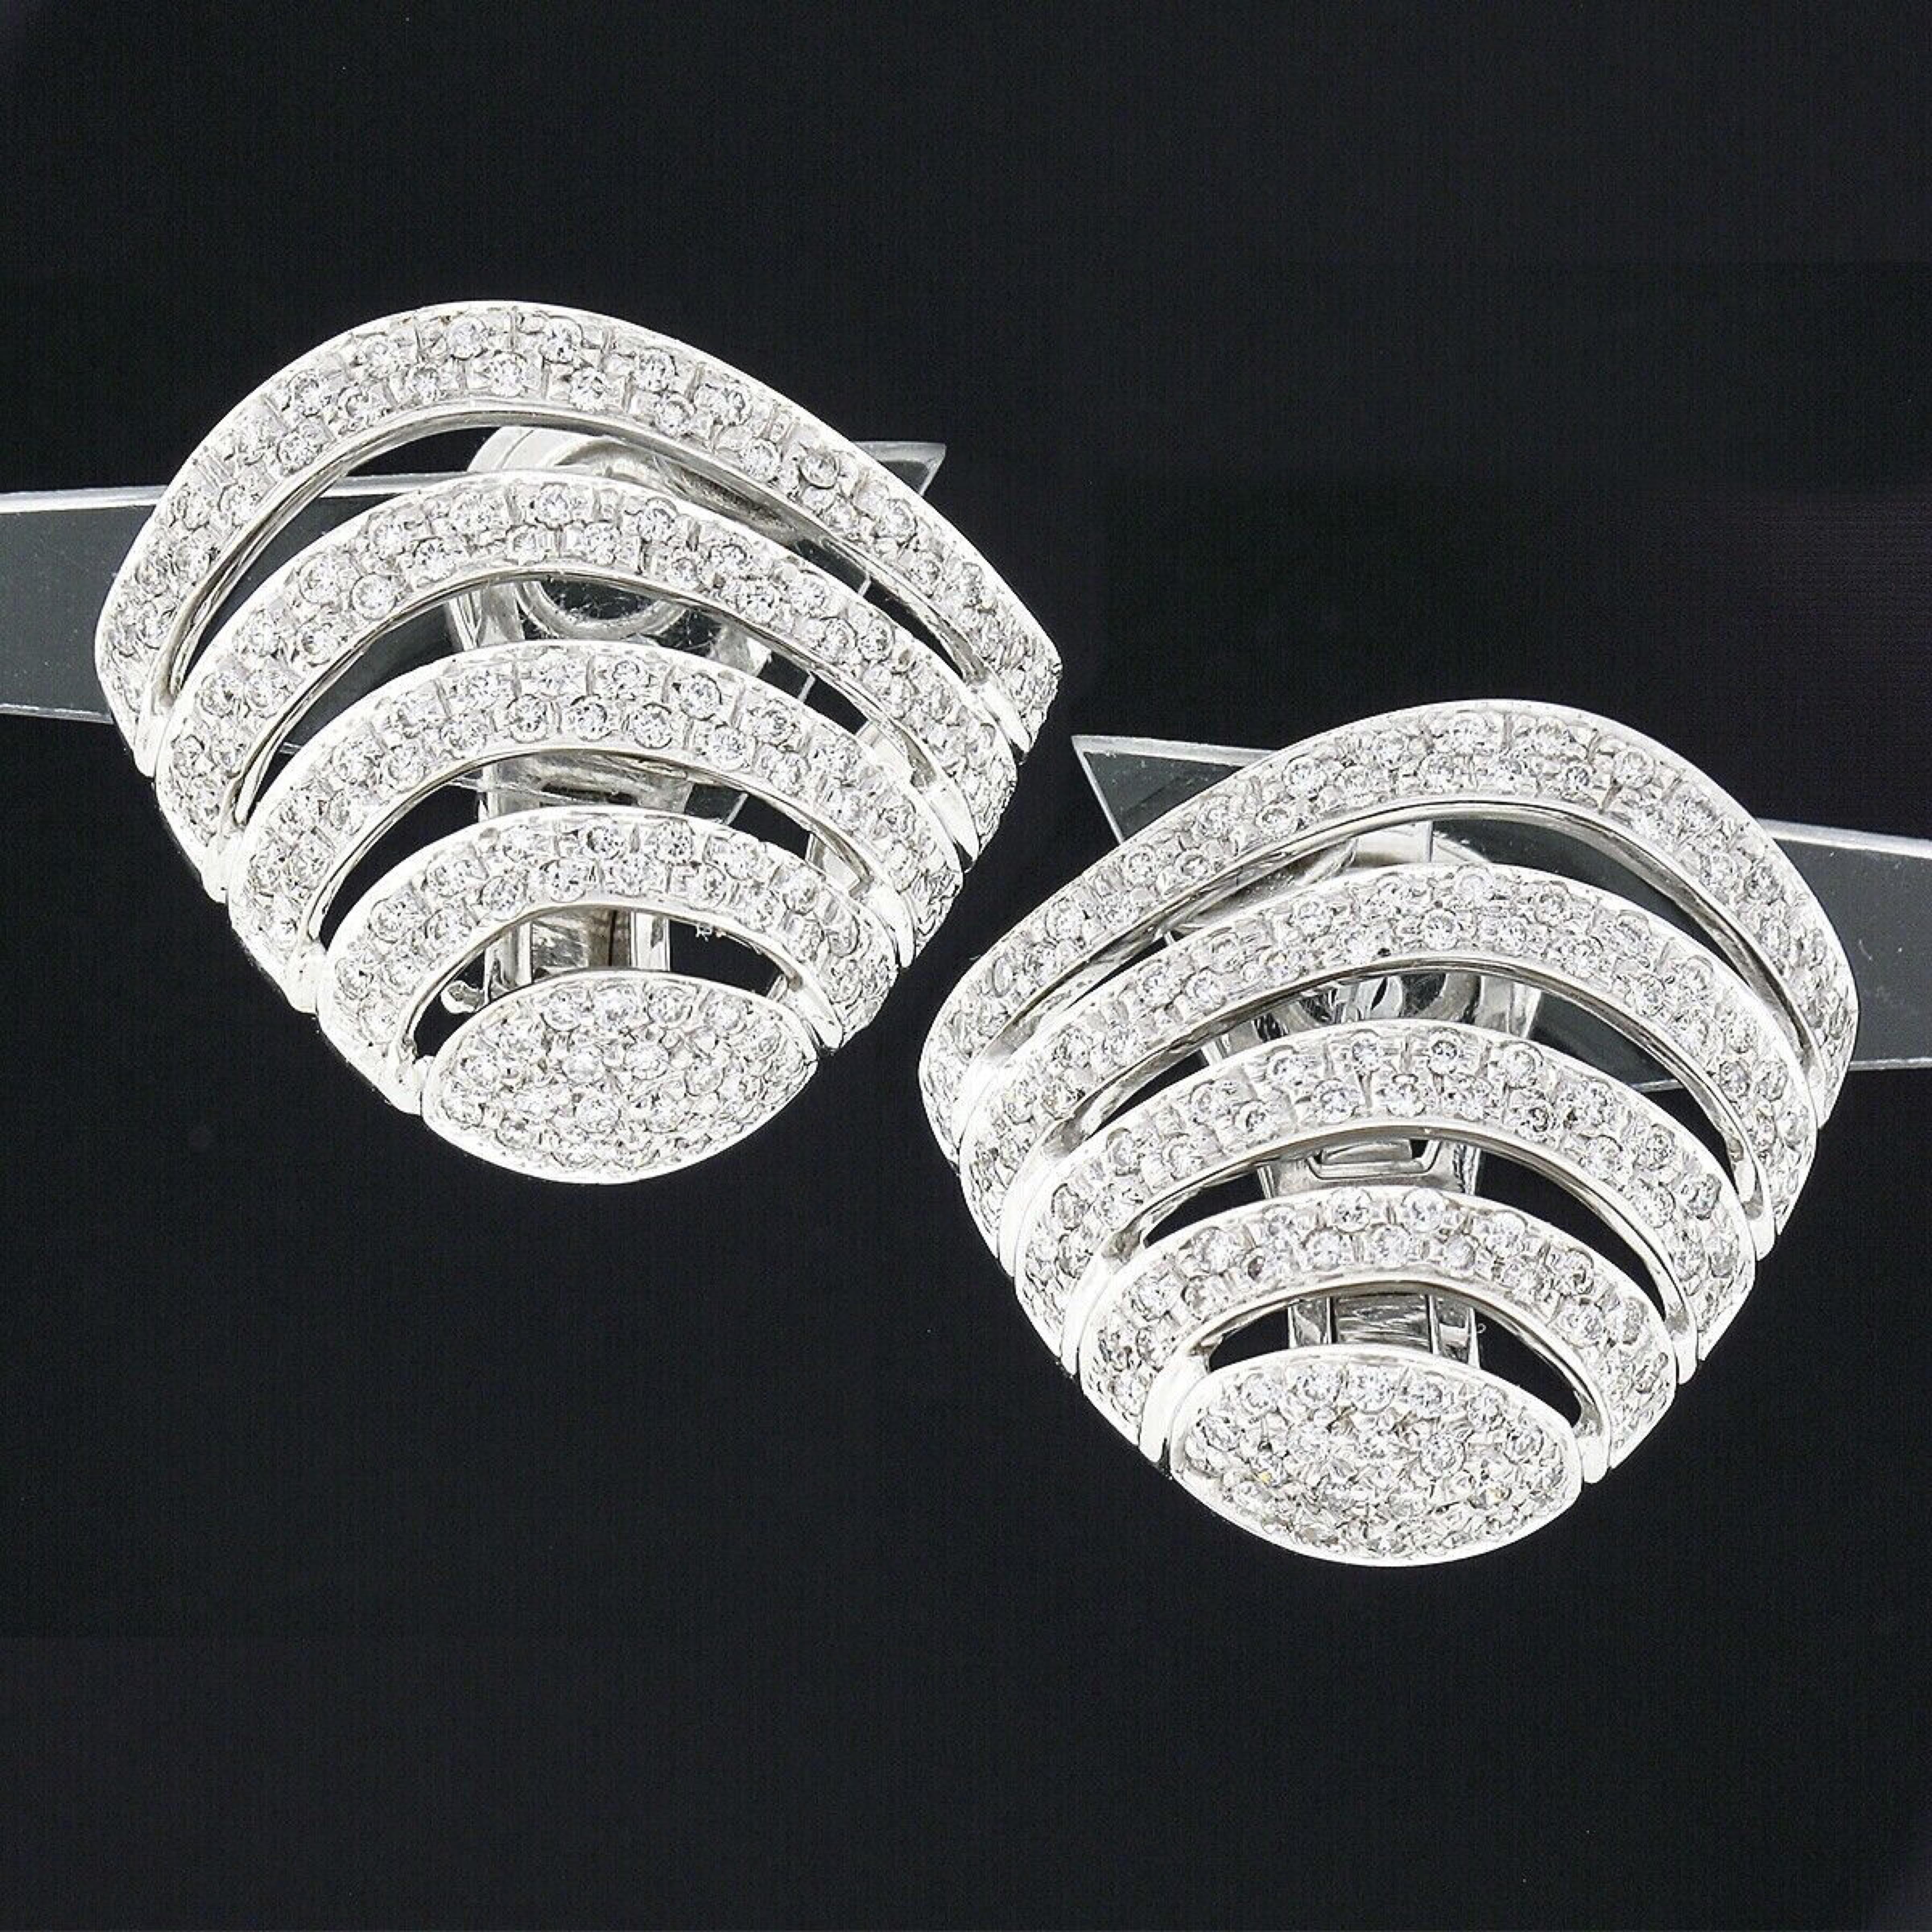 Here we have an absolutely elegant looking pair of earrings crafted in solid 18k white gold. They feature a beautiful open shell-shape design that is completely drenched with round brilliant cut diamonds throughout. These very fine quality diamonds